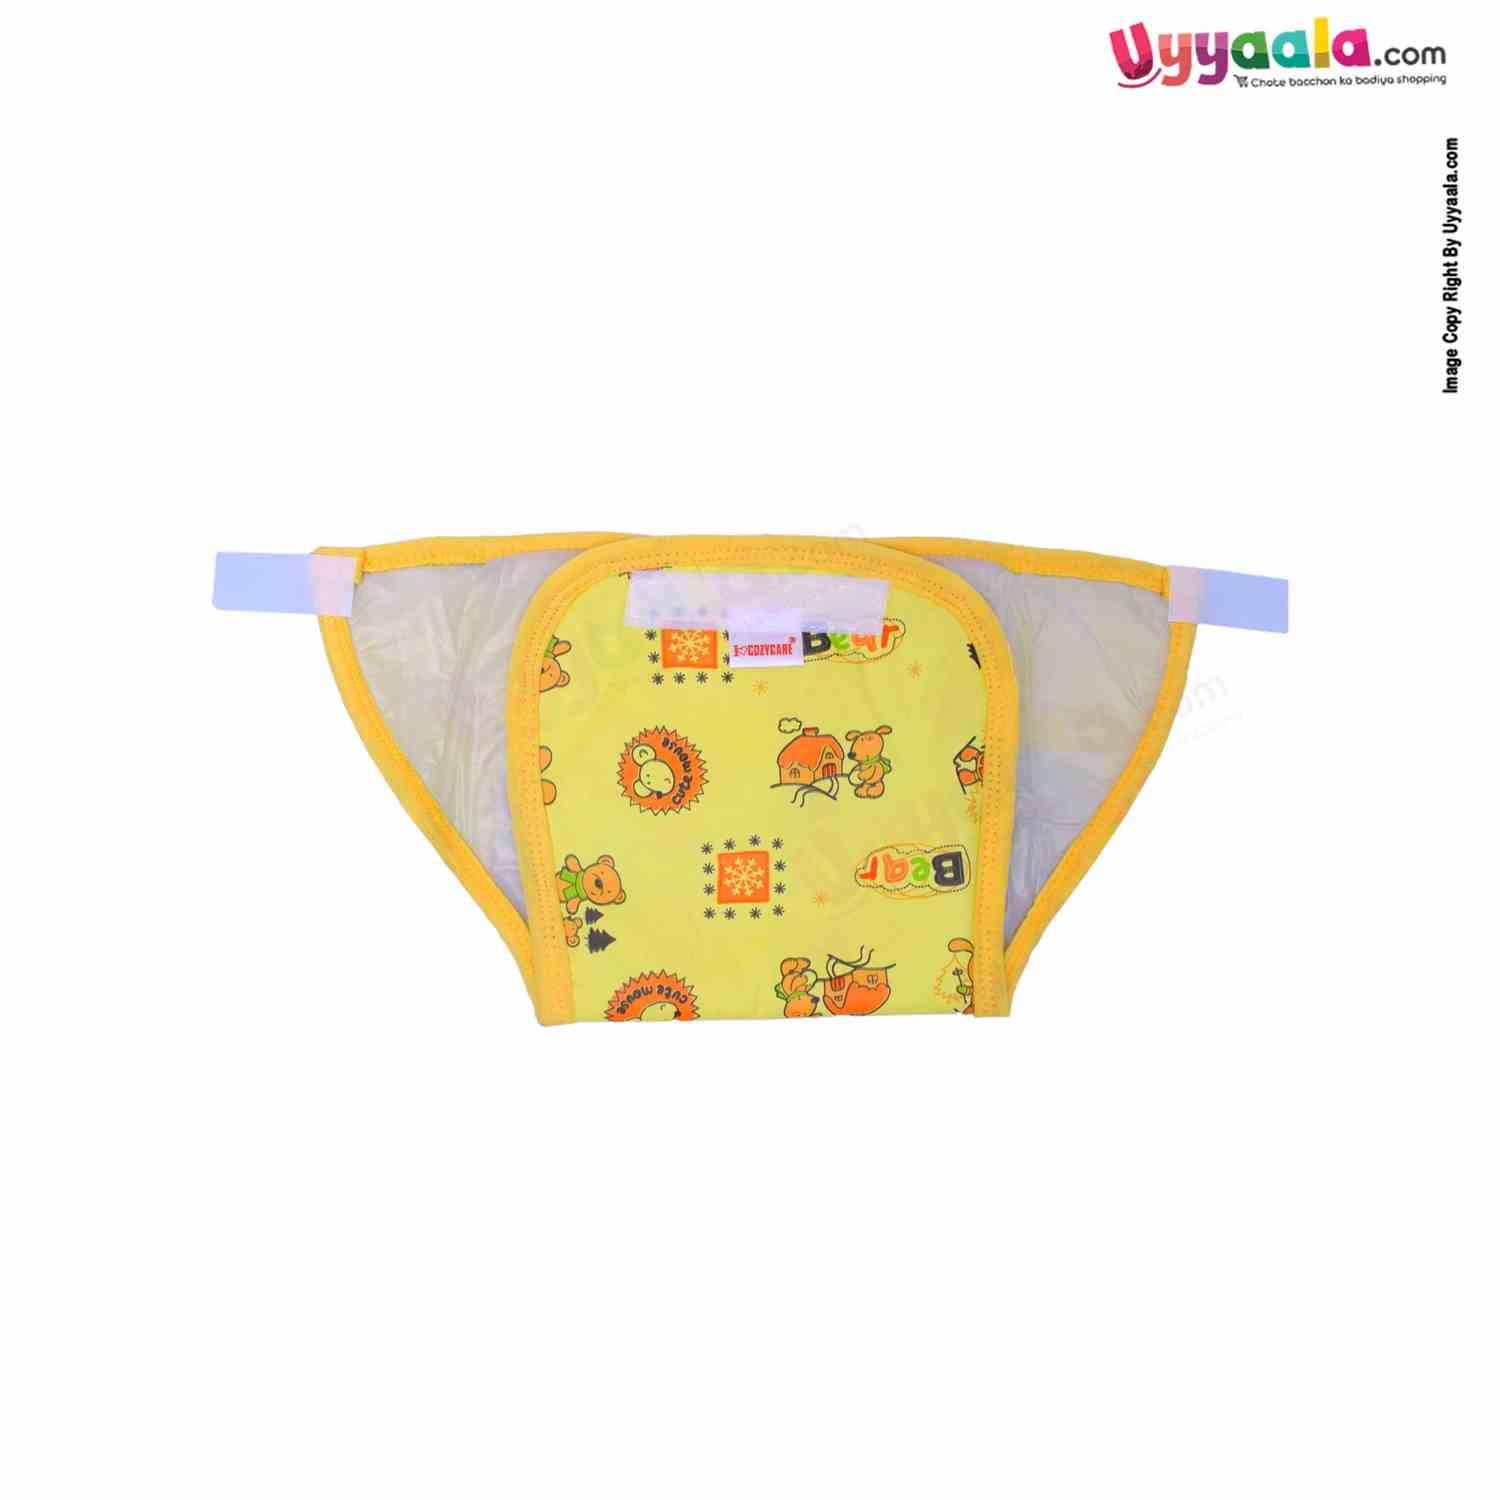 COZYCARE Washable Diapers Plastic ,Velcro Bear Print Pink, Blue & Yellow without Pads-3P Set (L)